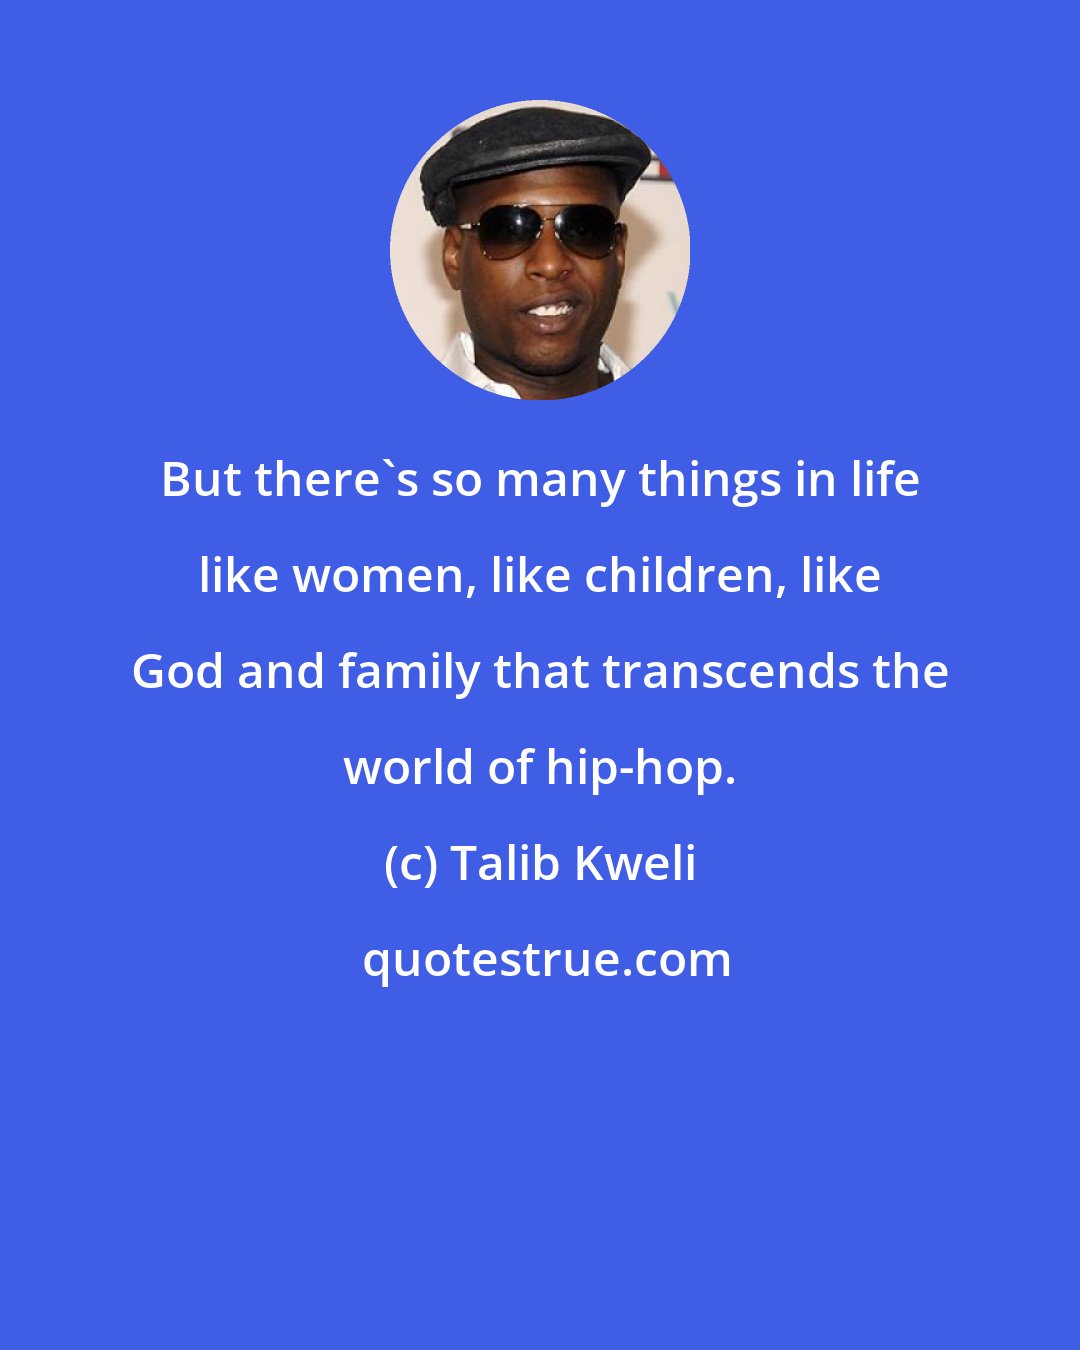 Talib Kweli: But there's so many things in life like women, like children, like God and family that transcends the world of hip-hop.